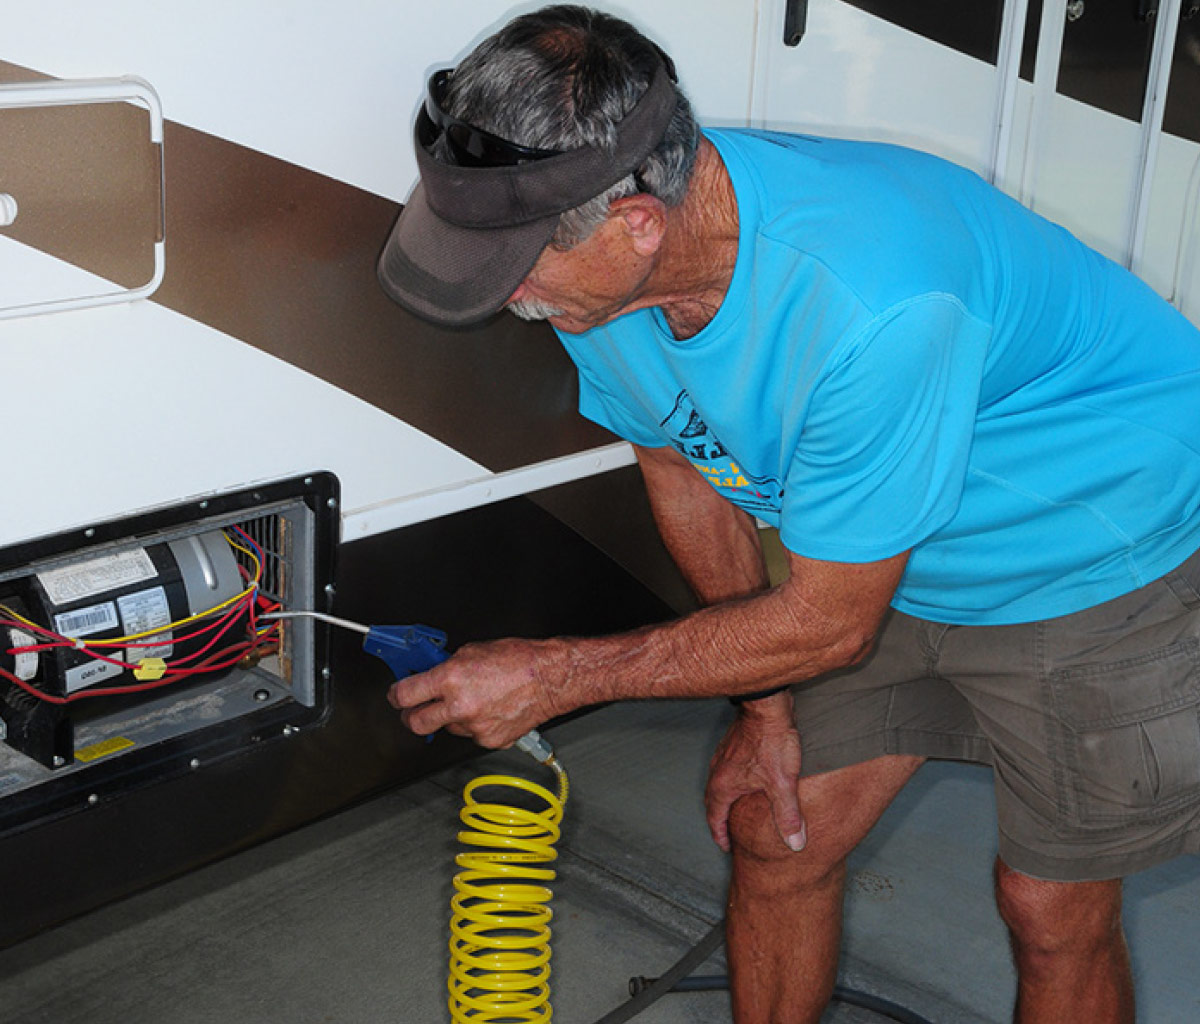 Furnace model being inspected and service by man in blue shirt, brown shorts, and brown visor. 